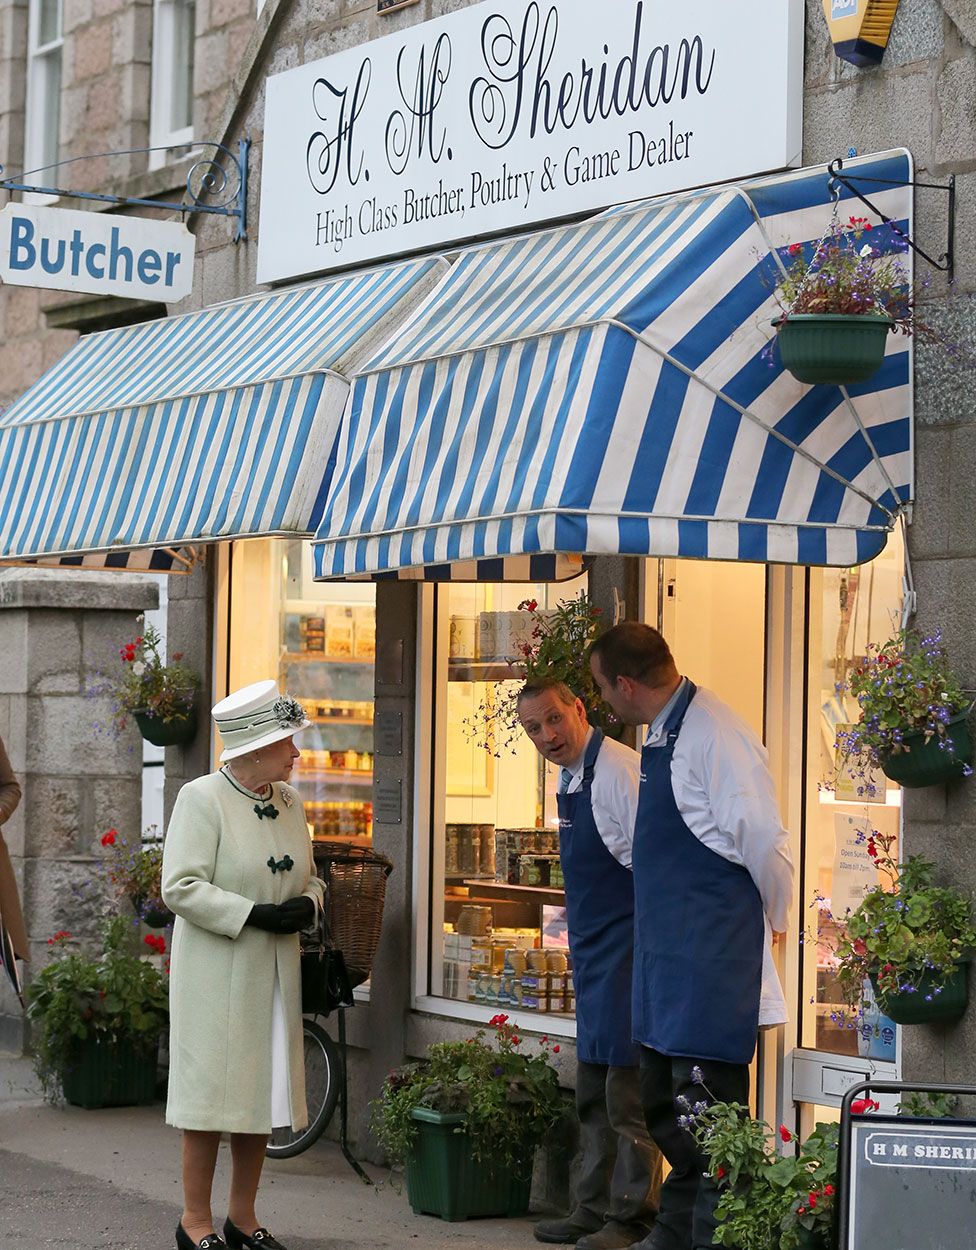 File photo dated 27/9/2012 of Queen Elizabeth II talks to the local butchers, in Ballater, Aberdeenshire, prior to unveiling a plaque marking a special Diamond Jubilee cairn close to her Balmoral Estate. Scotland was a special place for the Queen over the decades, both for holidays and royal duties. She spent part of her honeymoon at Birkhall on the rural Balmoral estate in Aberdeenshire and the estate was her favoured residence in Scotland. Issue date: Thursday September 8, 2022.